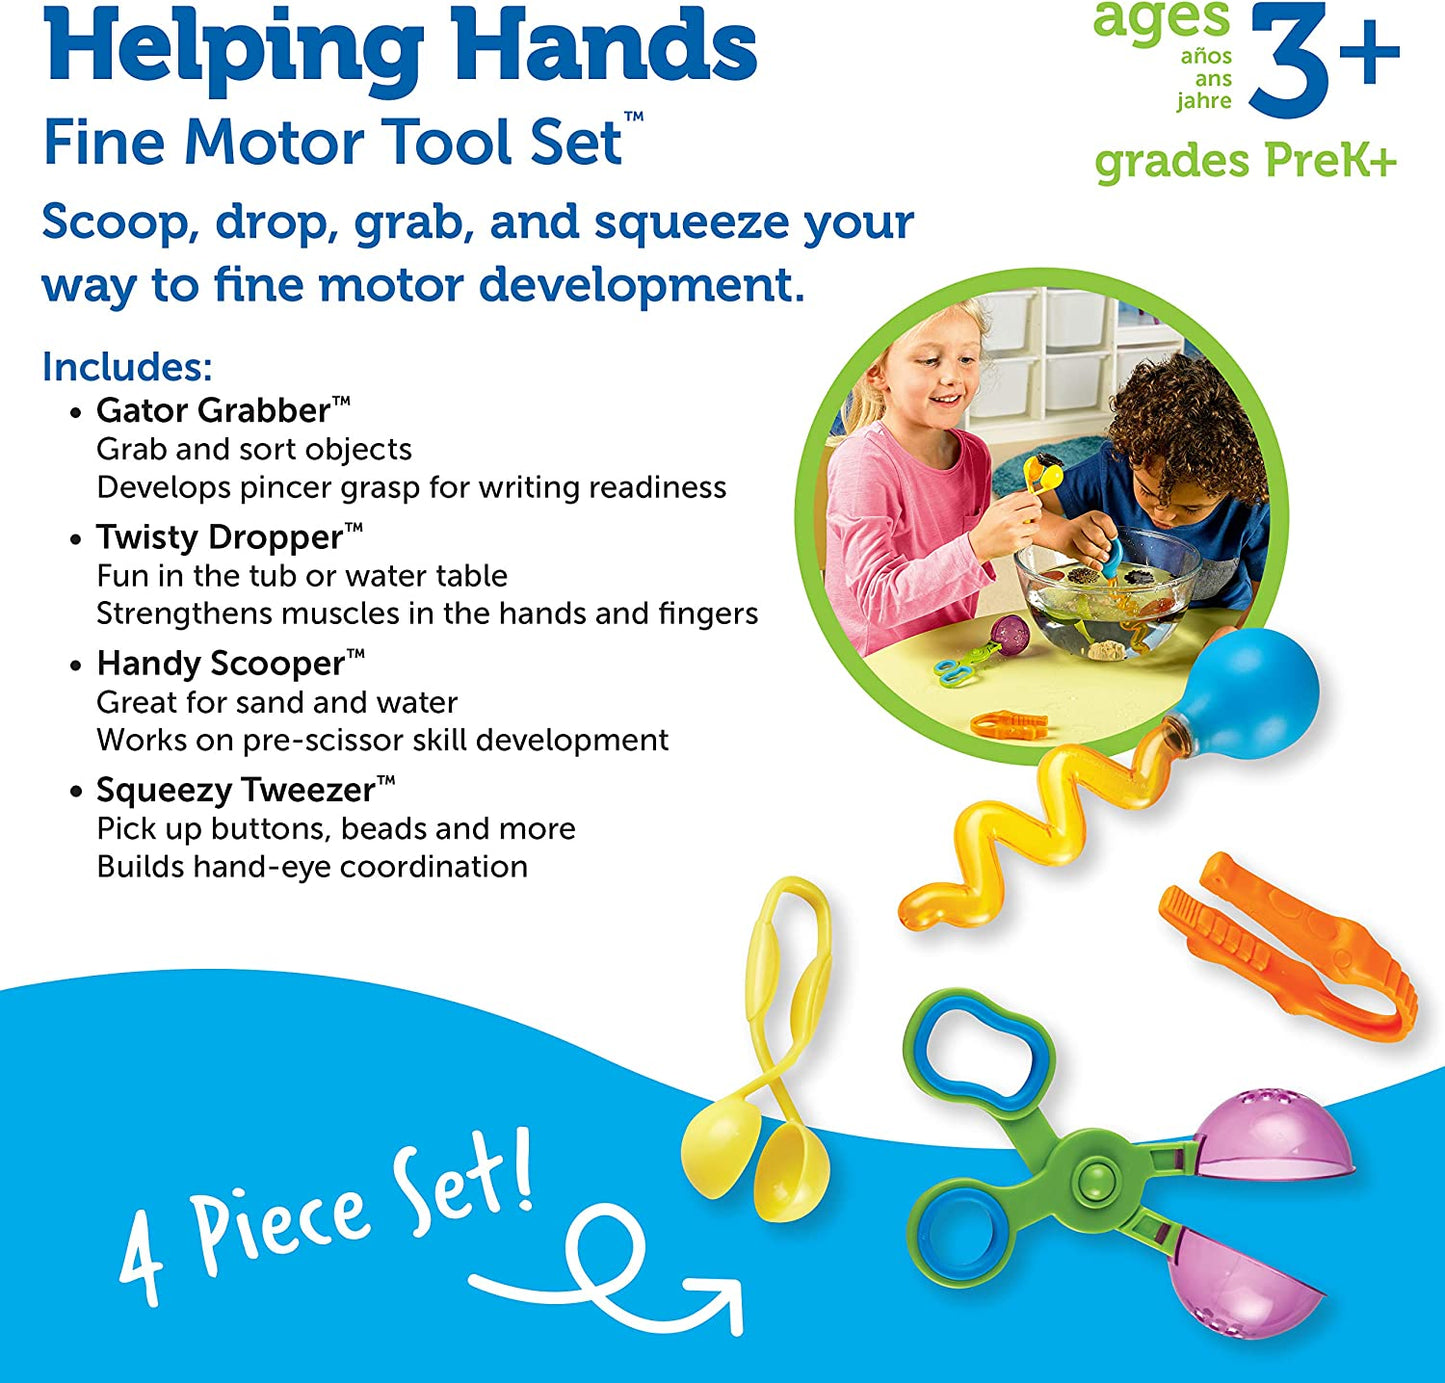 Helping Hands Fine Motor Tool Set | Learning and Exploring Through Play